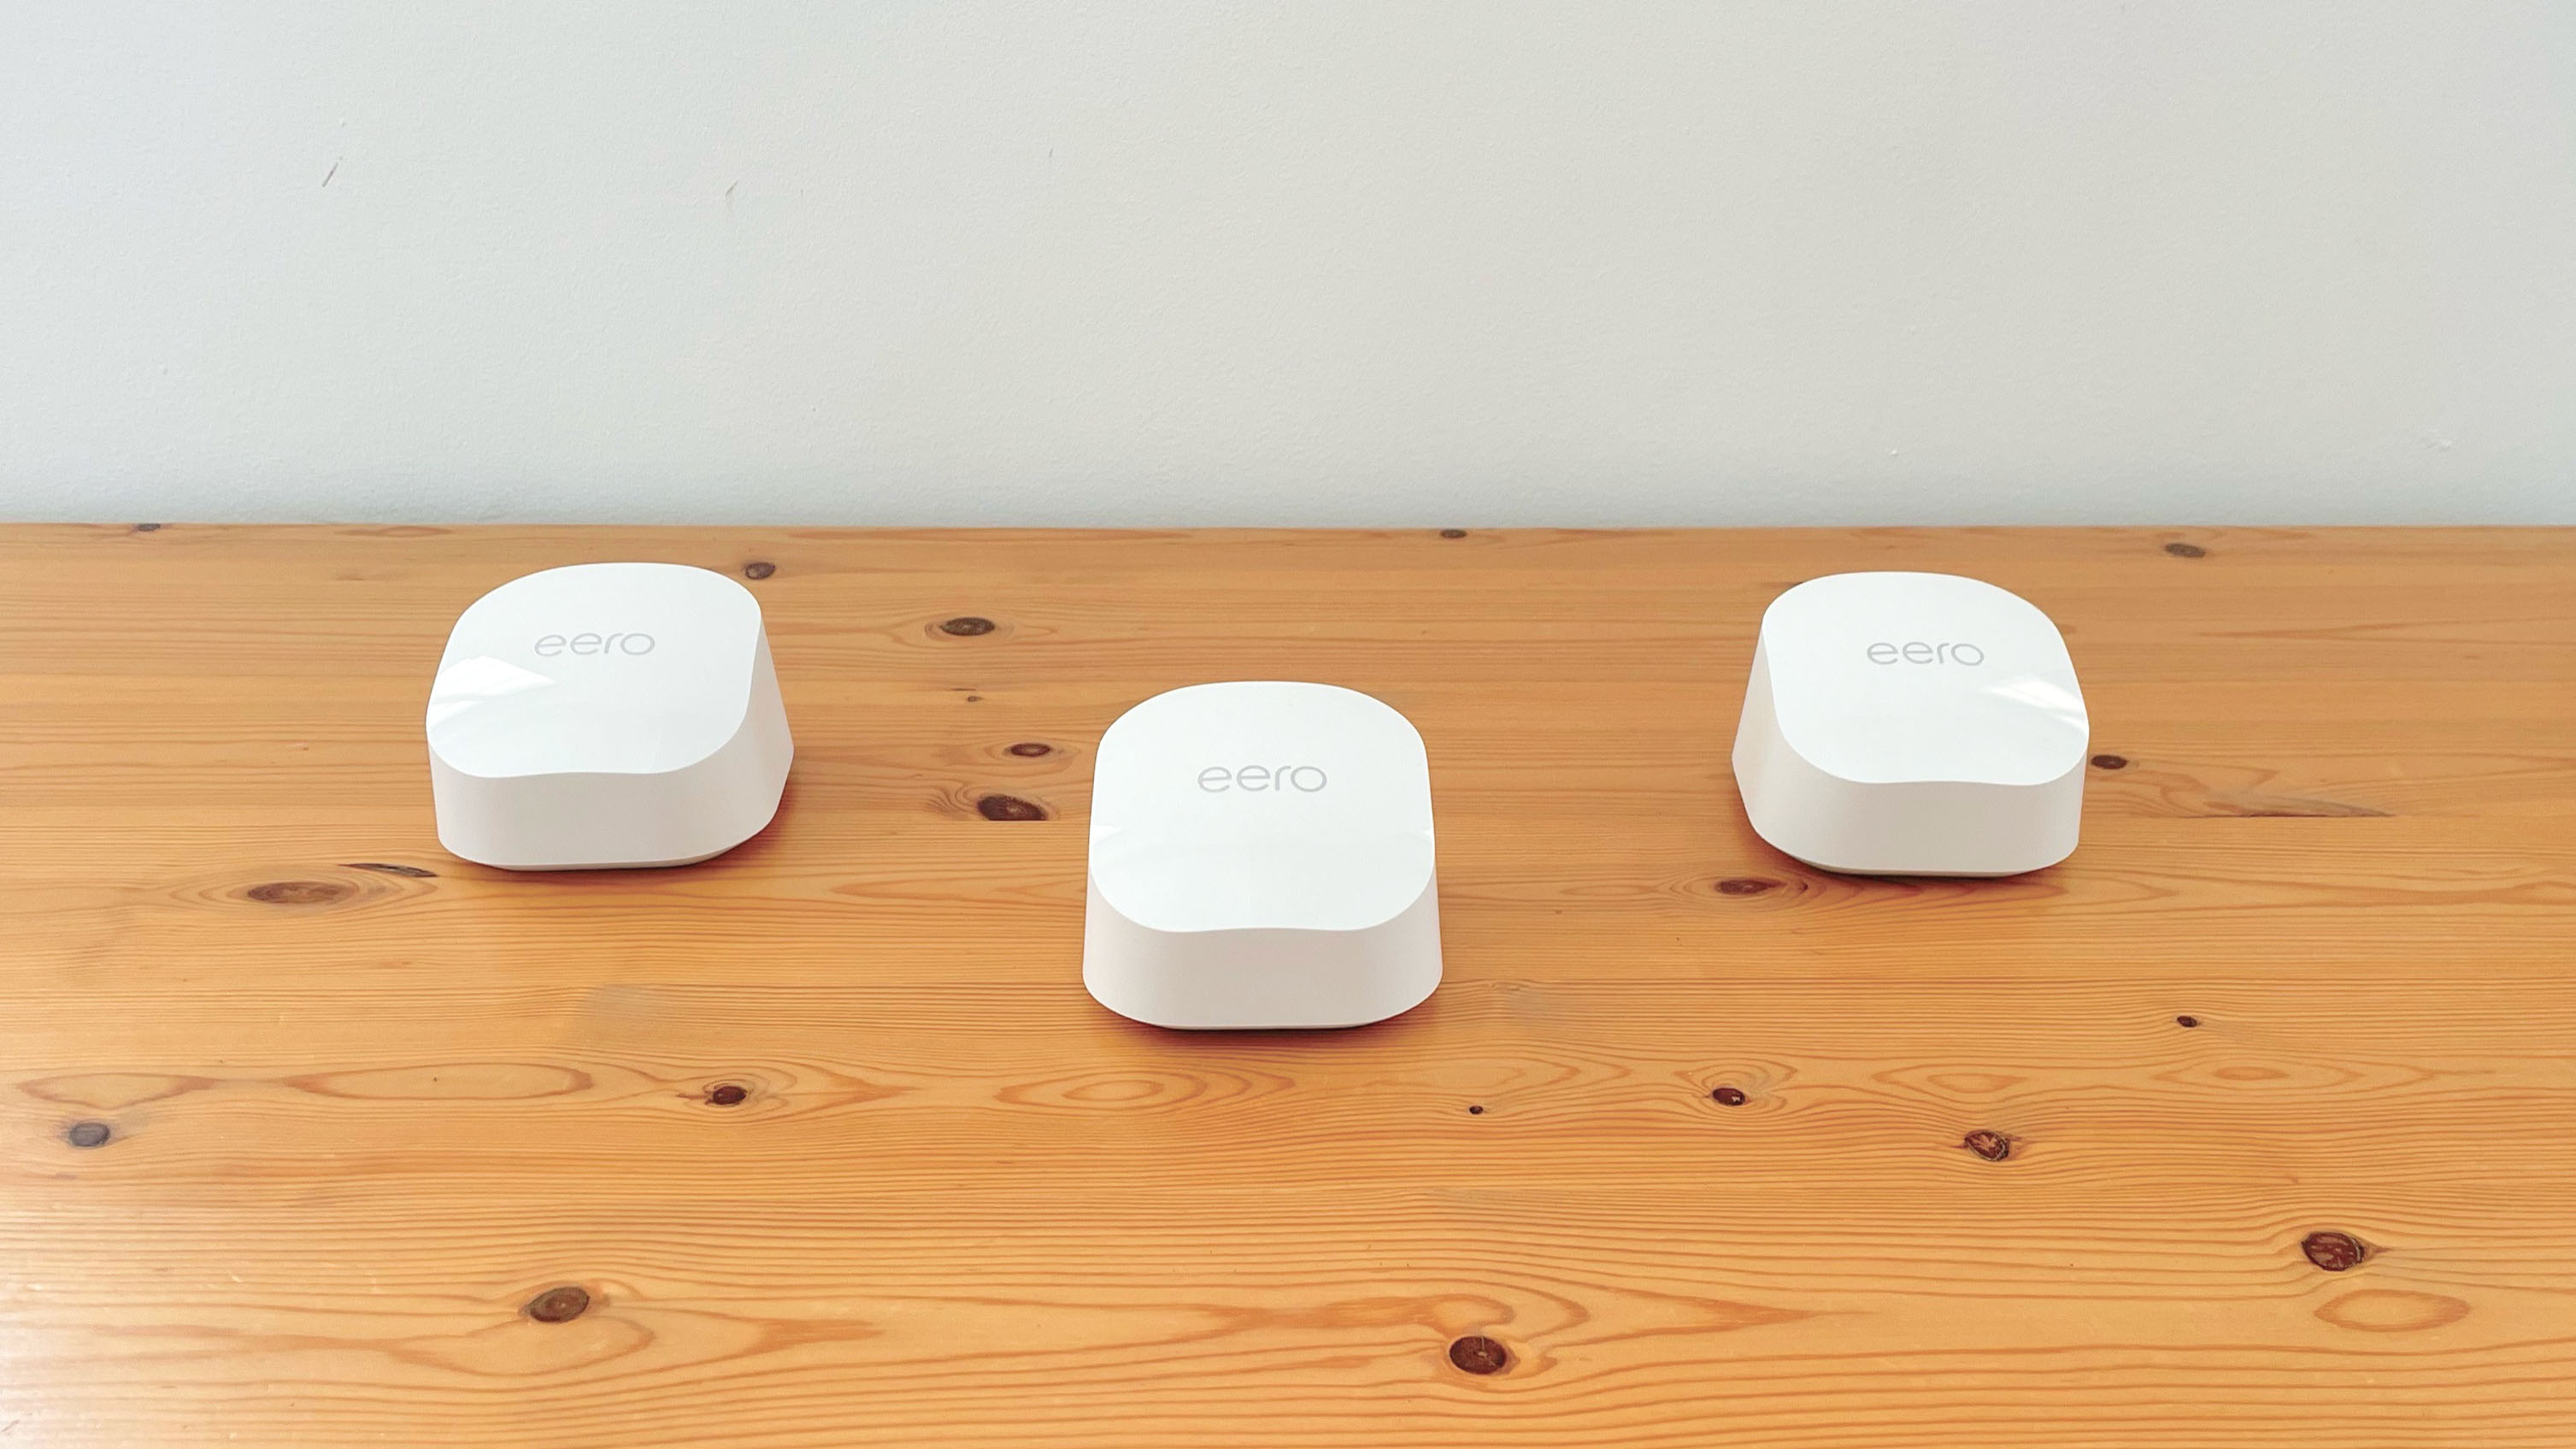 eero 6+ Dual-band mesh Wi-Fi 6 router/extender at Crutchfield